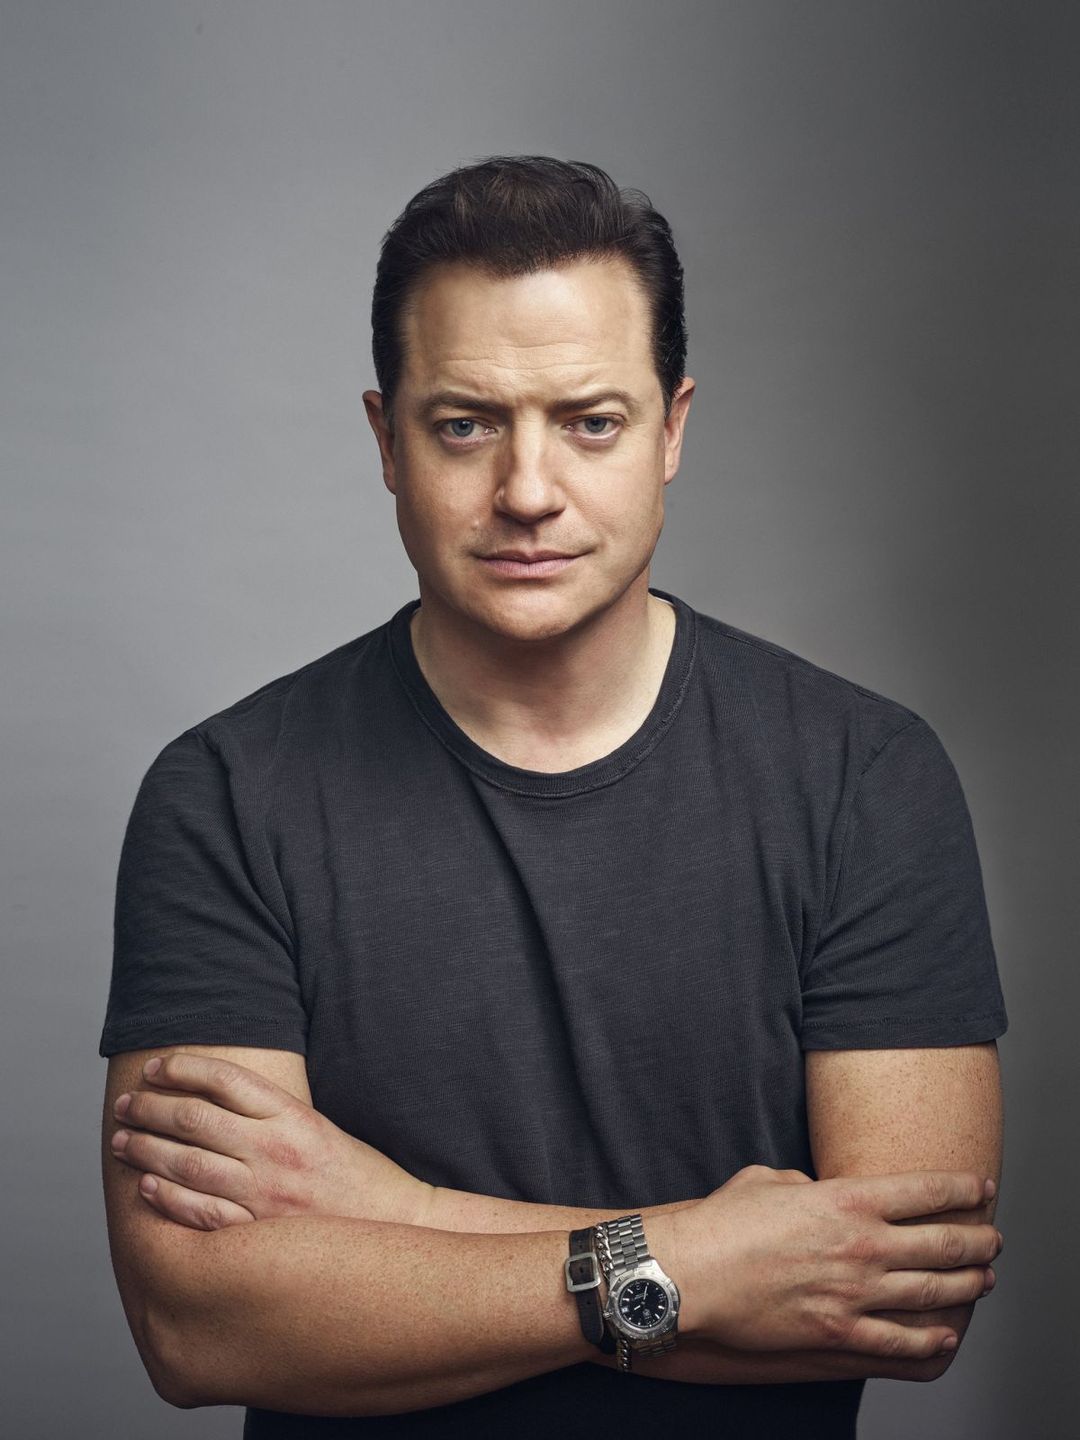 Brendan Fraser who is his father